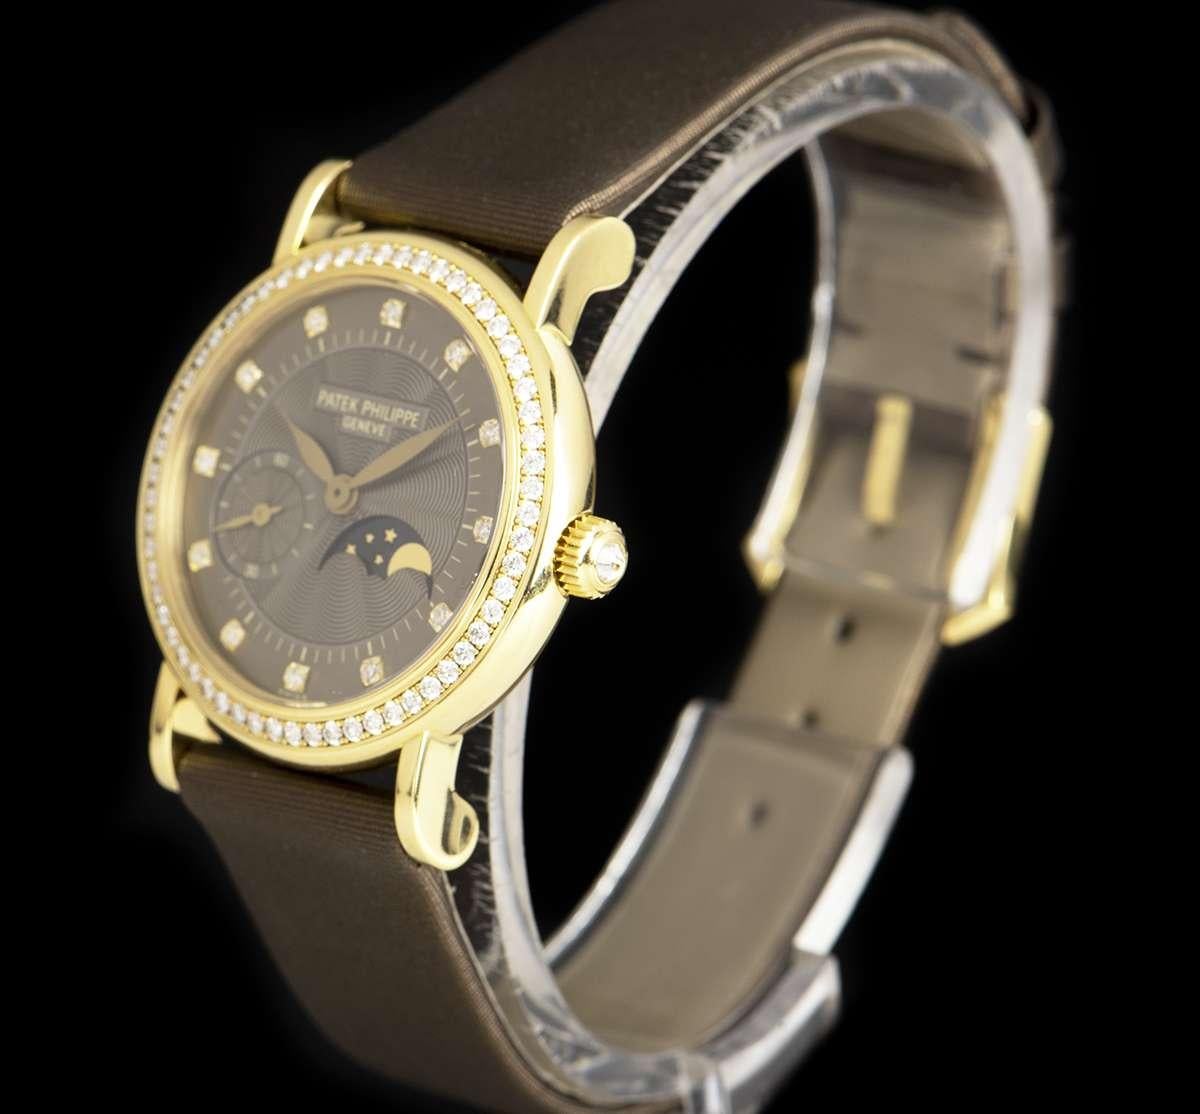 An 18k Yellow Gold Calatrava Ladies Wristwatch, brown dial set with 12 applied round brilliant cut diamond hour markers, moonphase aperture at 4 0'clock, small seconds between 8 and 9 0'clock, a fixed 18k yellow gold bezel set with approximately 61